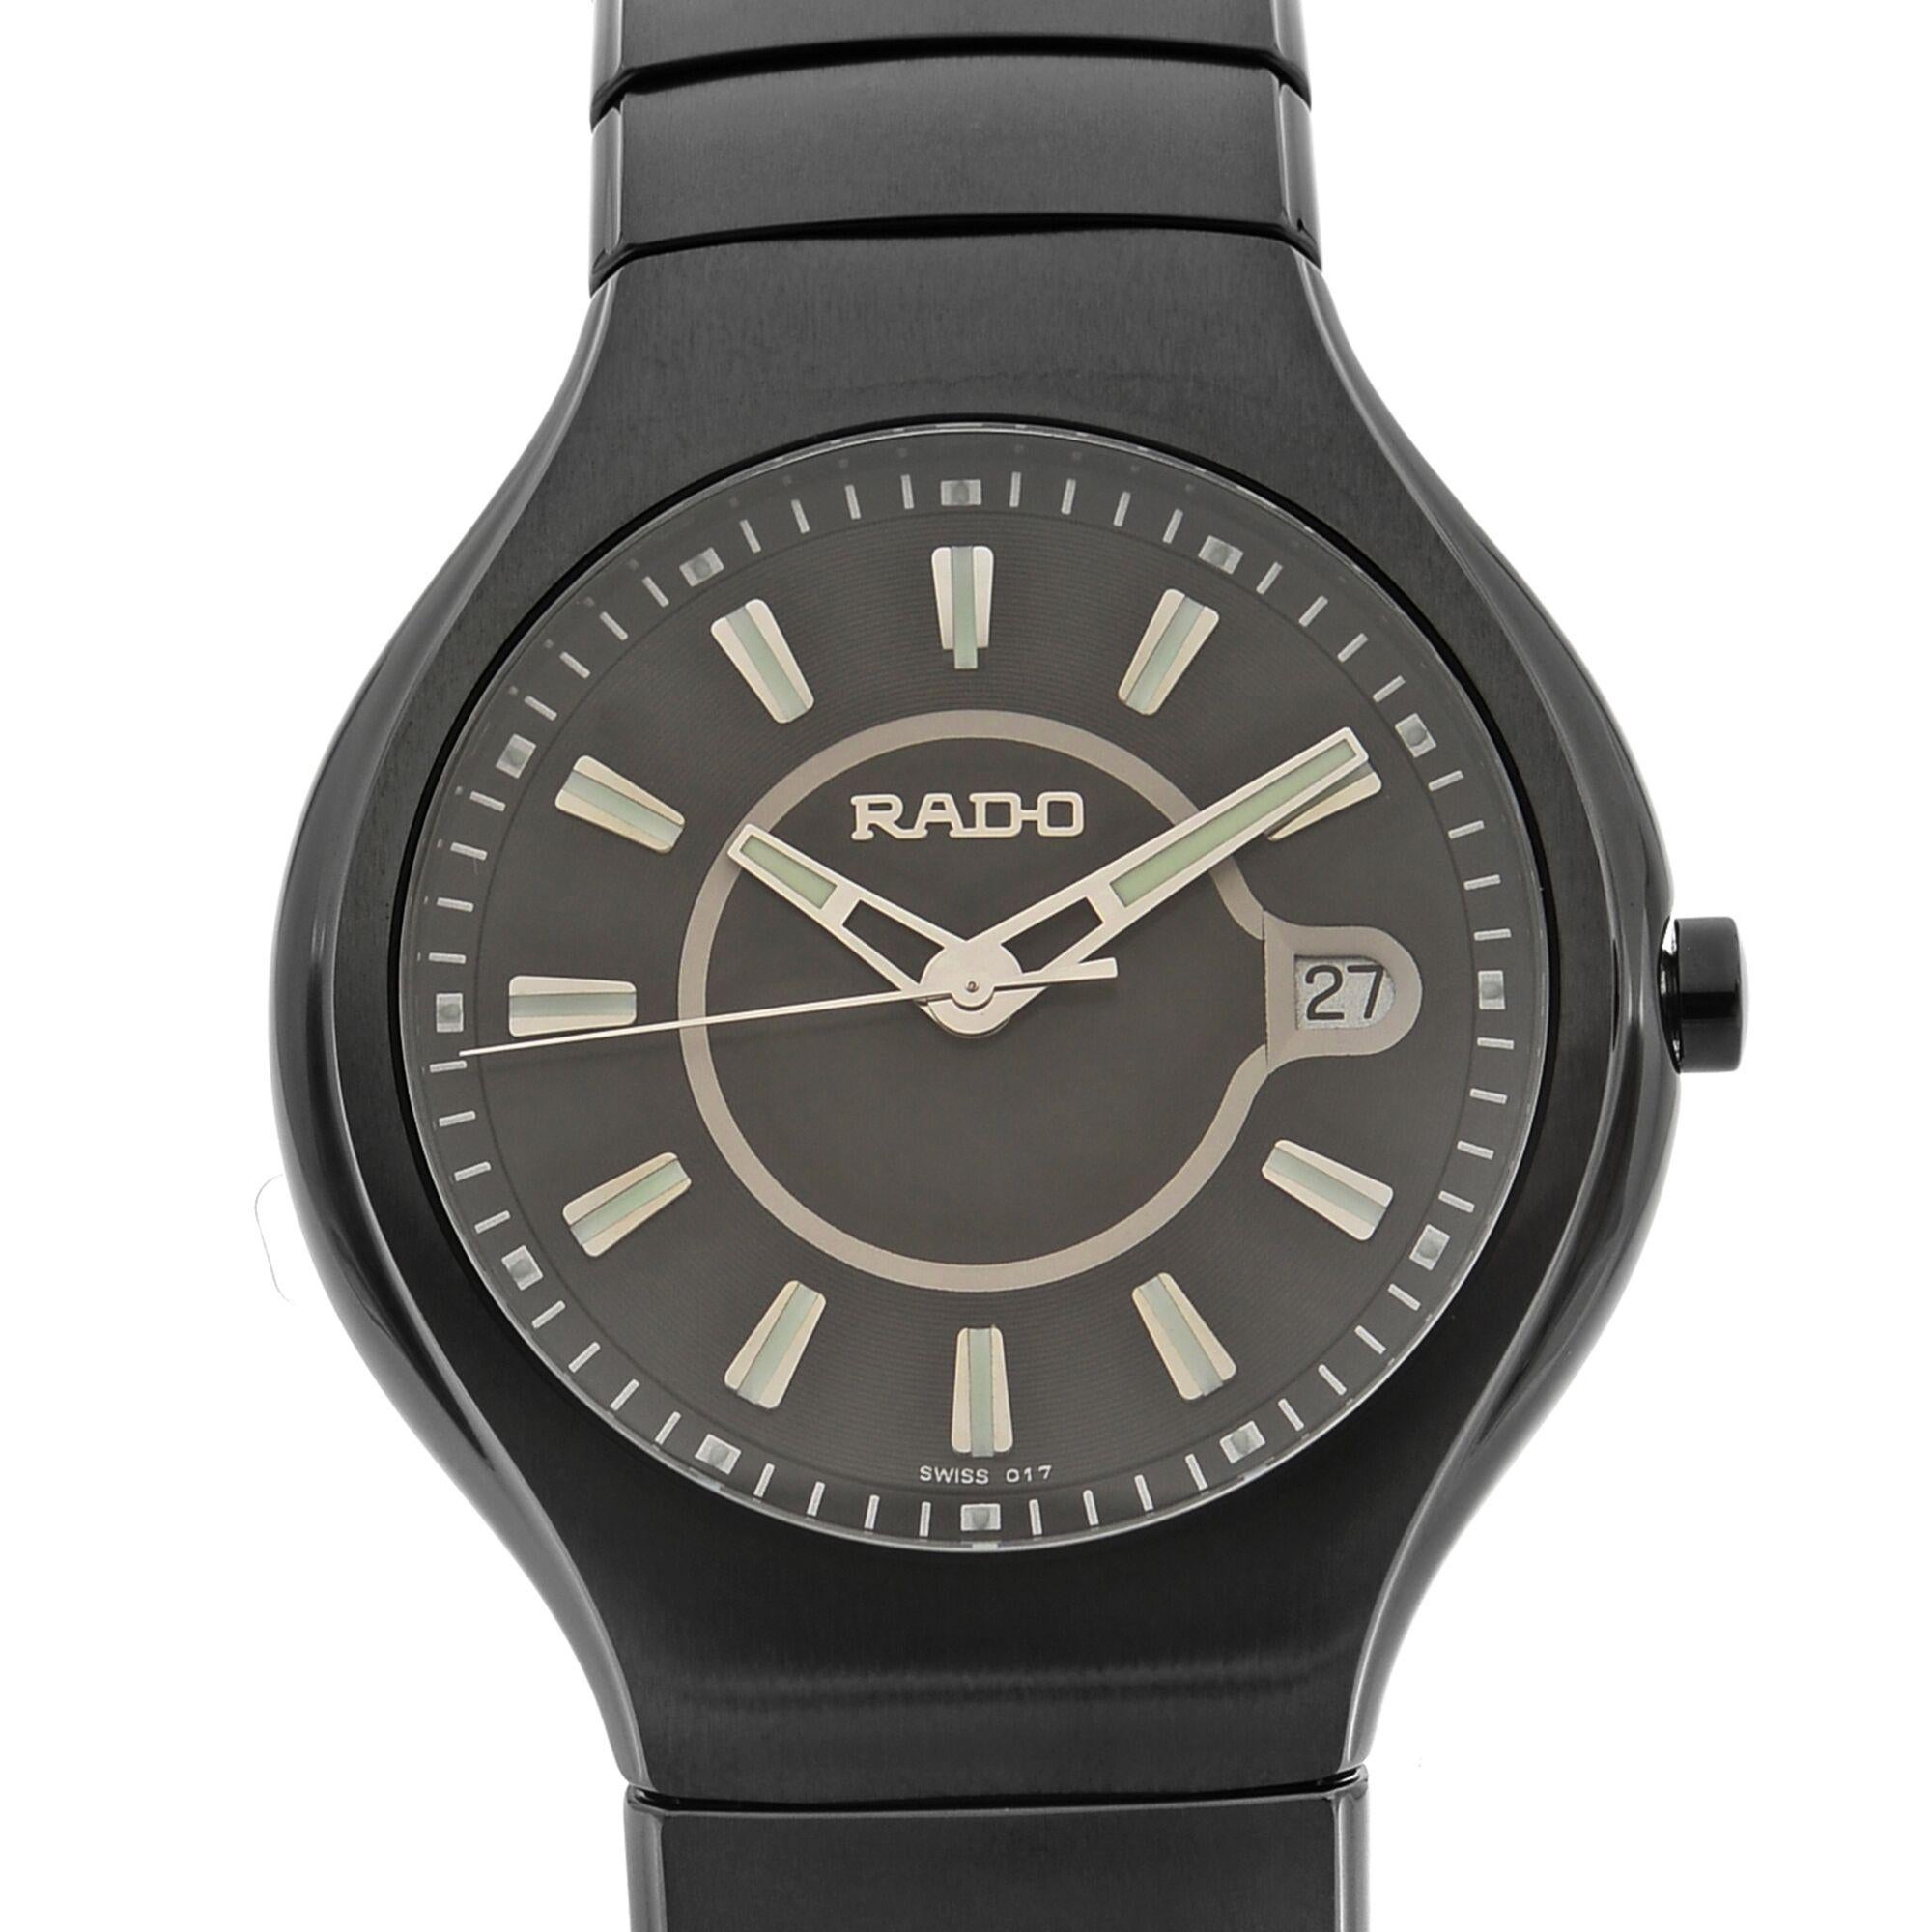 This brand new Rado True R27677172 is a beautiful men's timepiece that is powered by a quartz movement which is cased in a ceramic case. It has a round shape face, date dial and has hand sticks style markers. It is completed with a ceramic band that